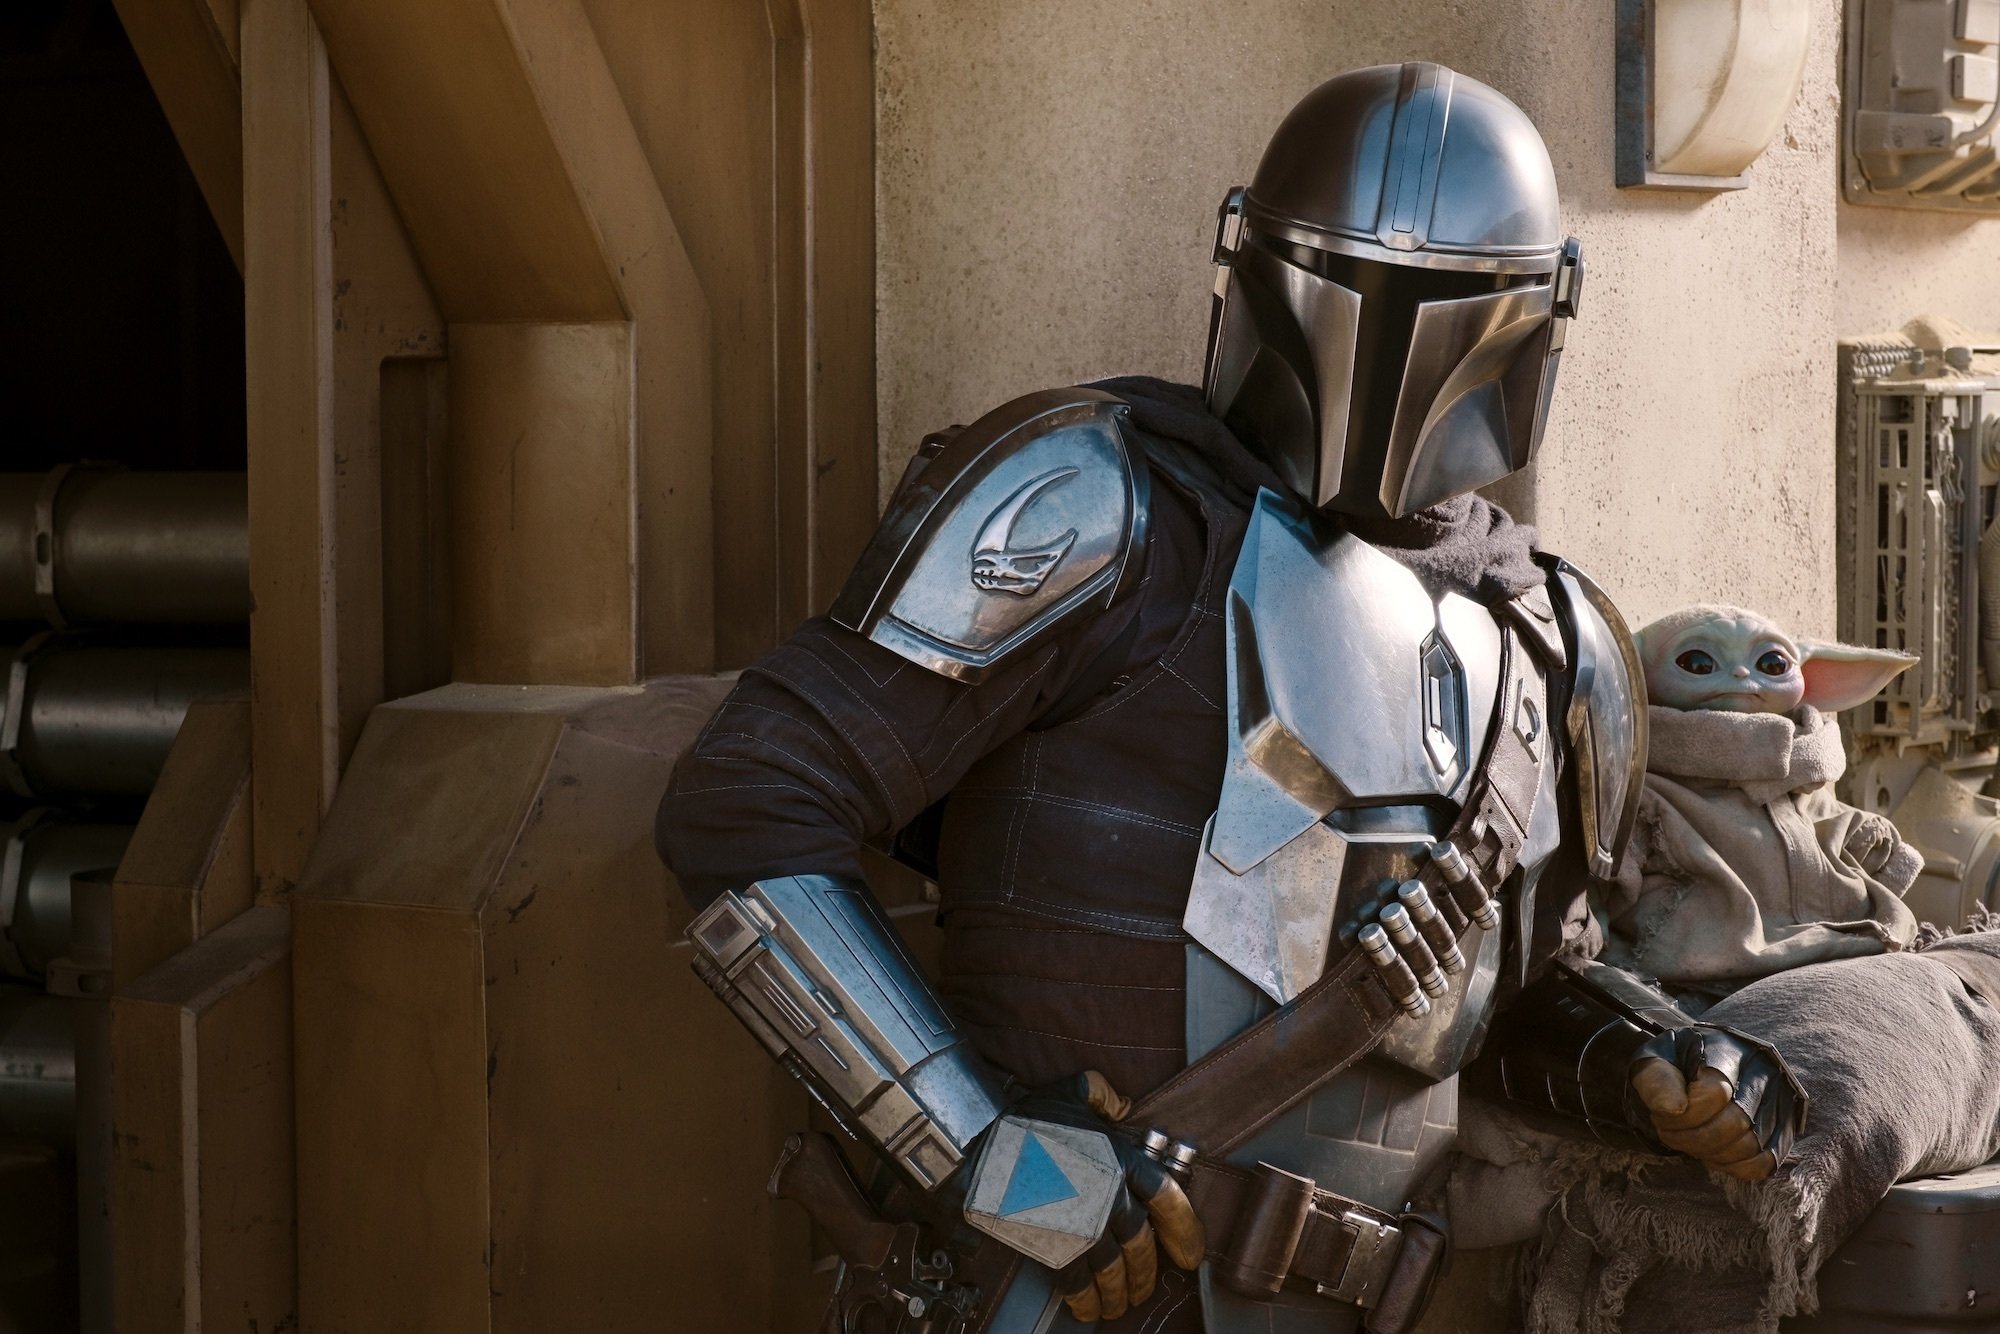 The Mandalorian and The Child in Season 2.